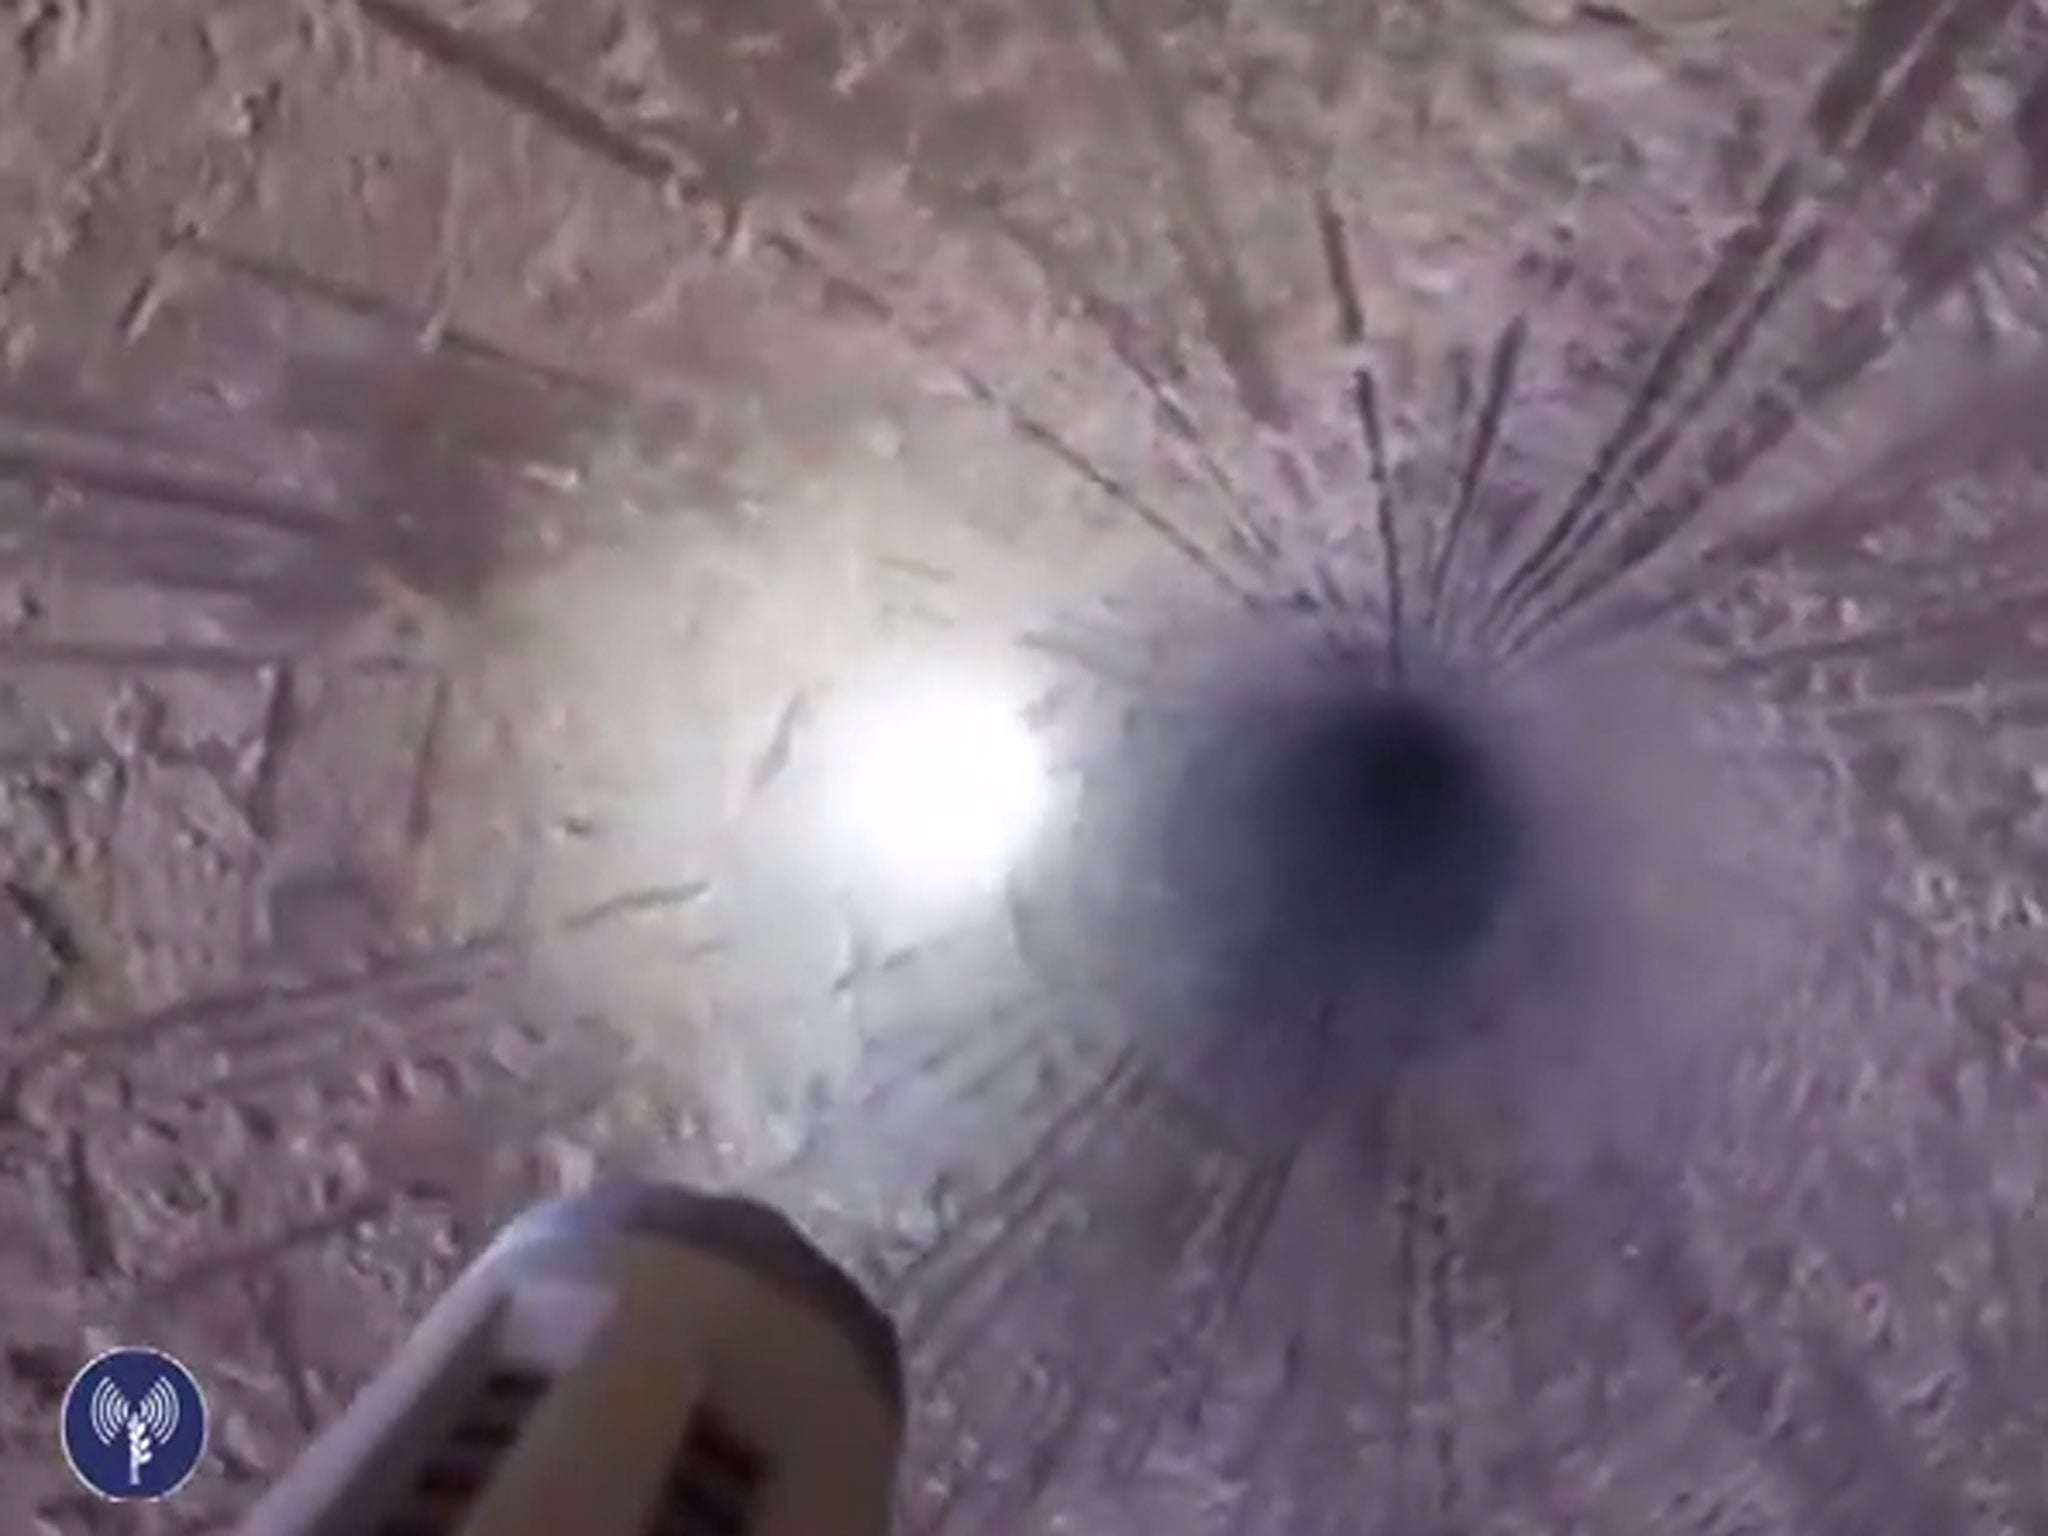 A video released by the Israeli military purporting to show the destruction of a Hamas tunnel